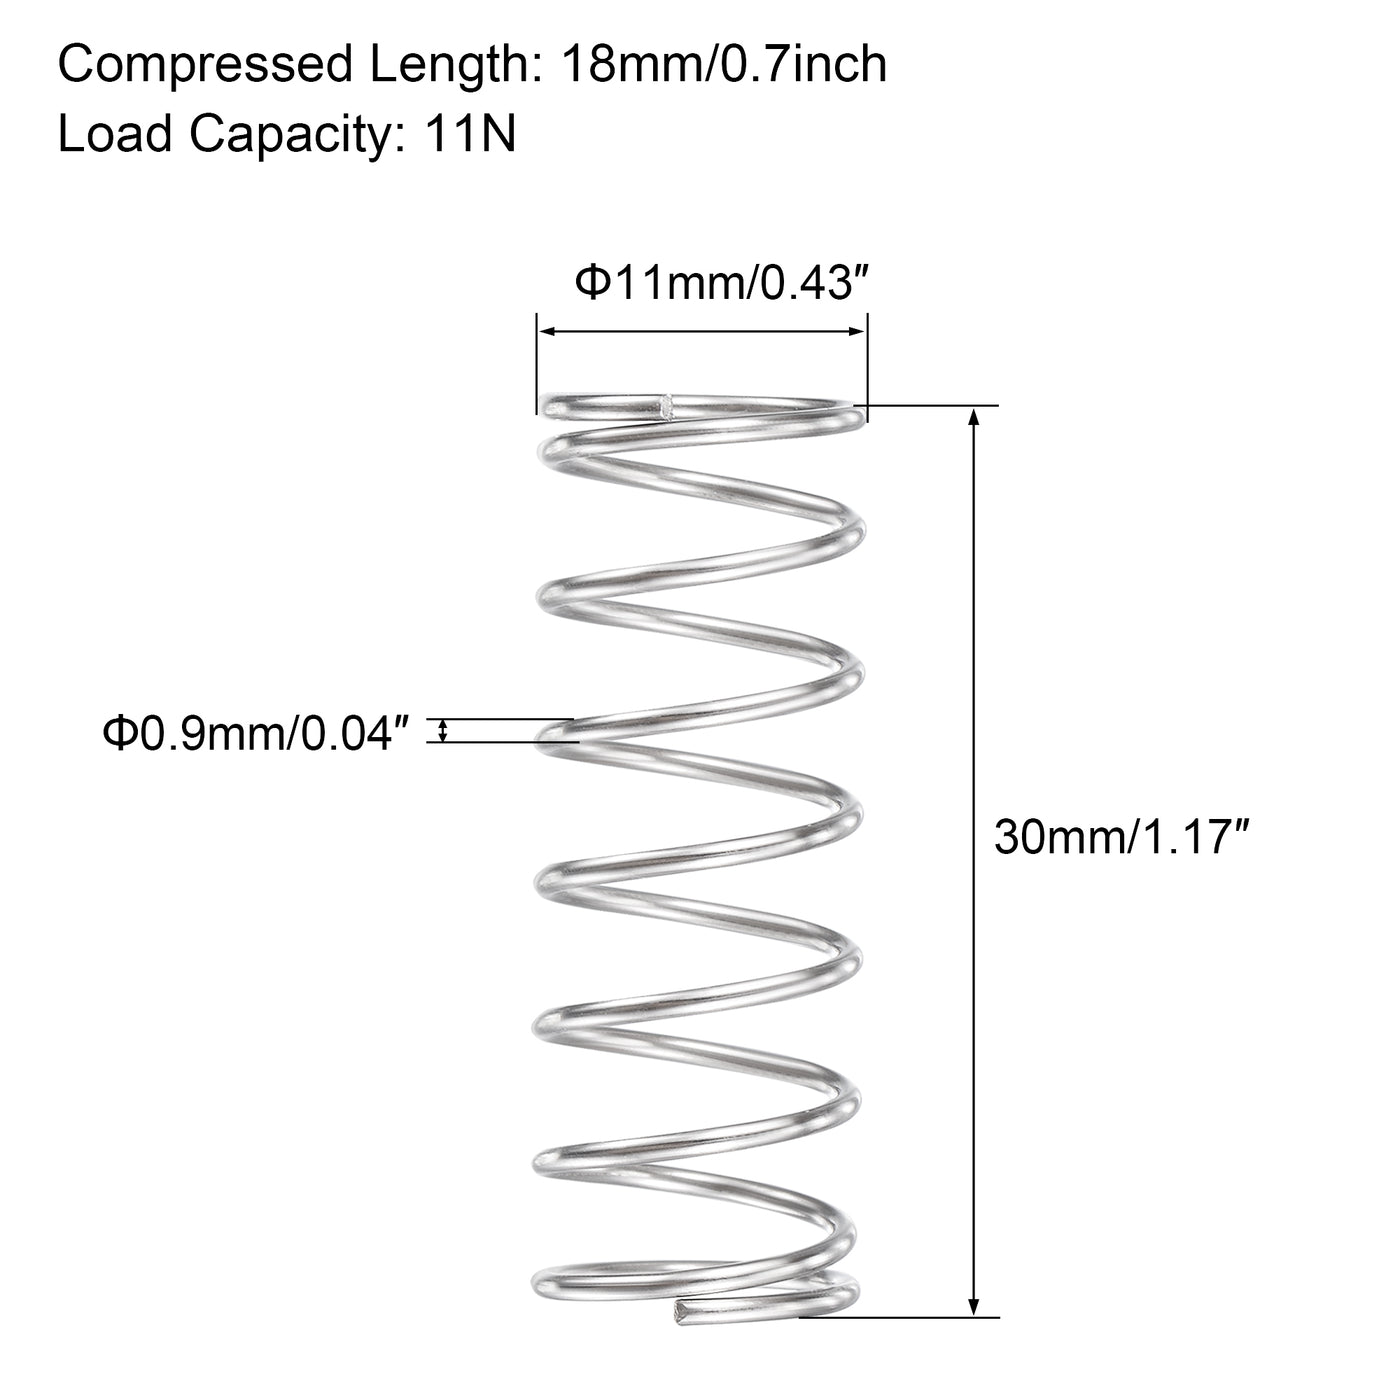 uxcell Uxcell 11mmx0.9mmx30mm 304 Stainless Steel Compression Spring 11N Load Capacity 10pcs